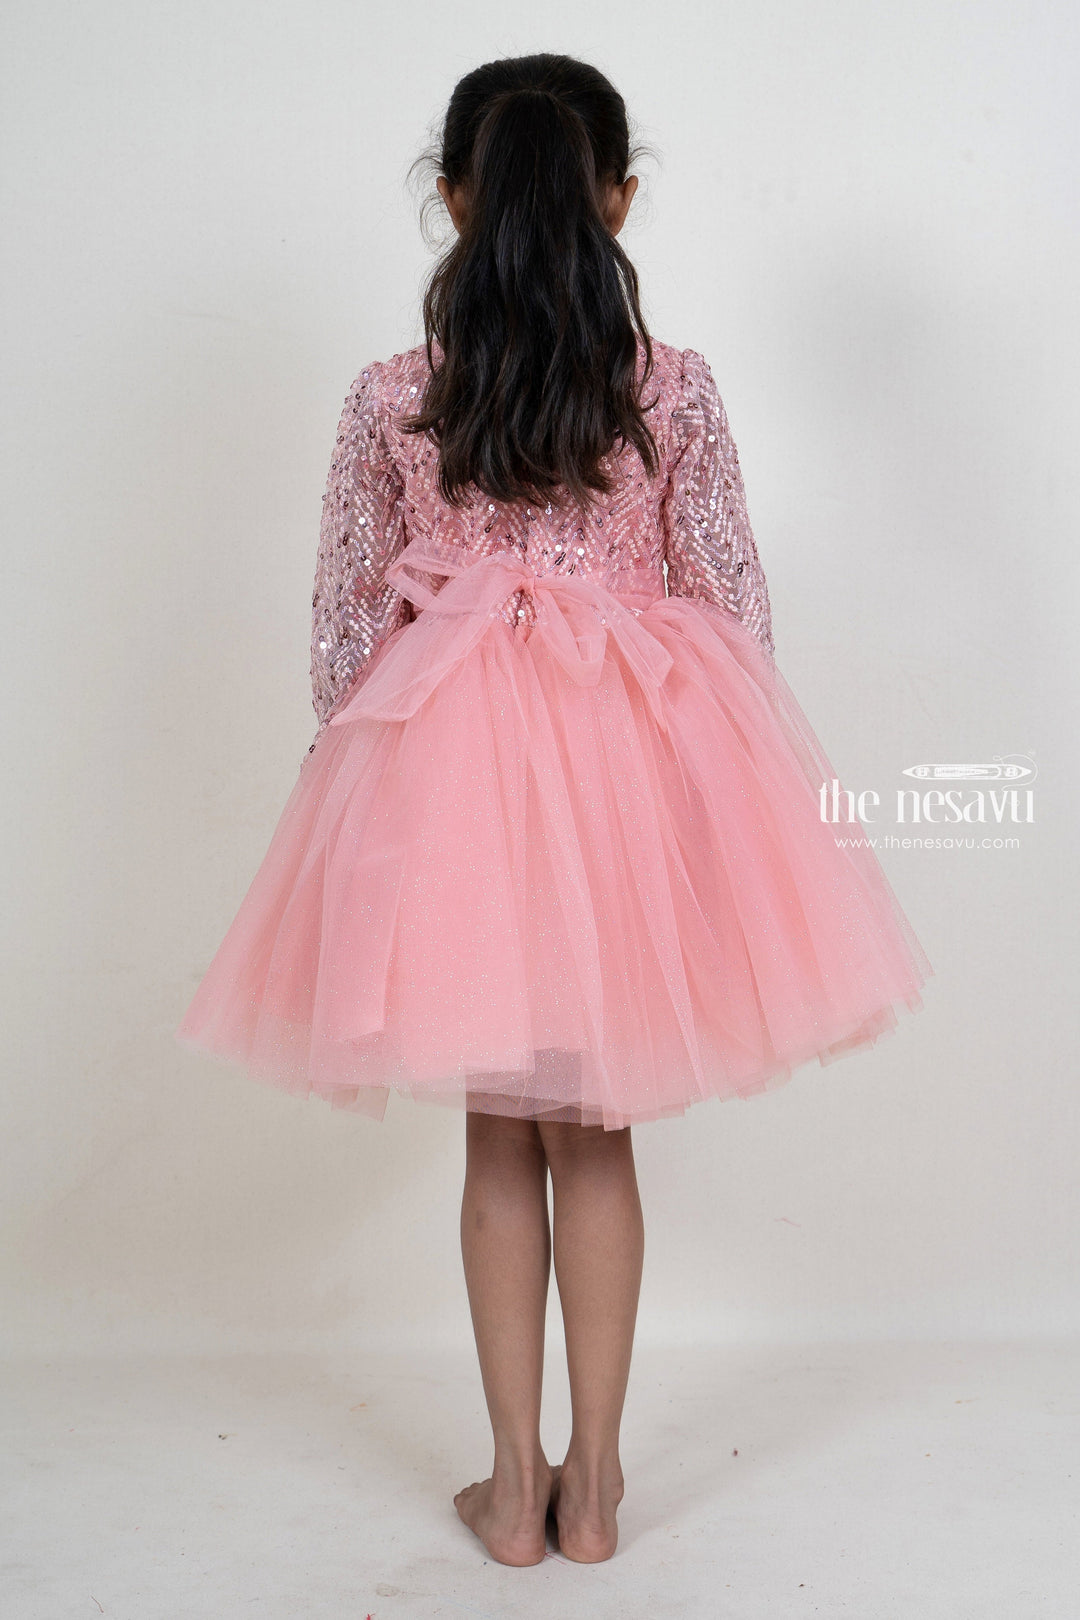 The Nesavu Party Frock Sequenced Pink Soft Net Party Frock With Elbow Sleeve For New Born Baby Girls psr silks Nesavu